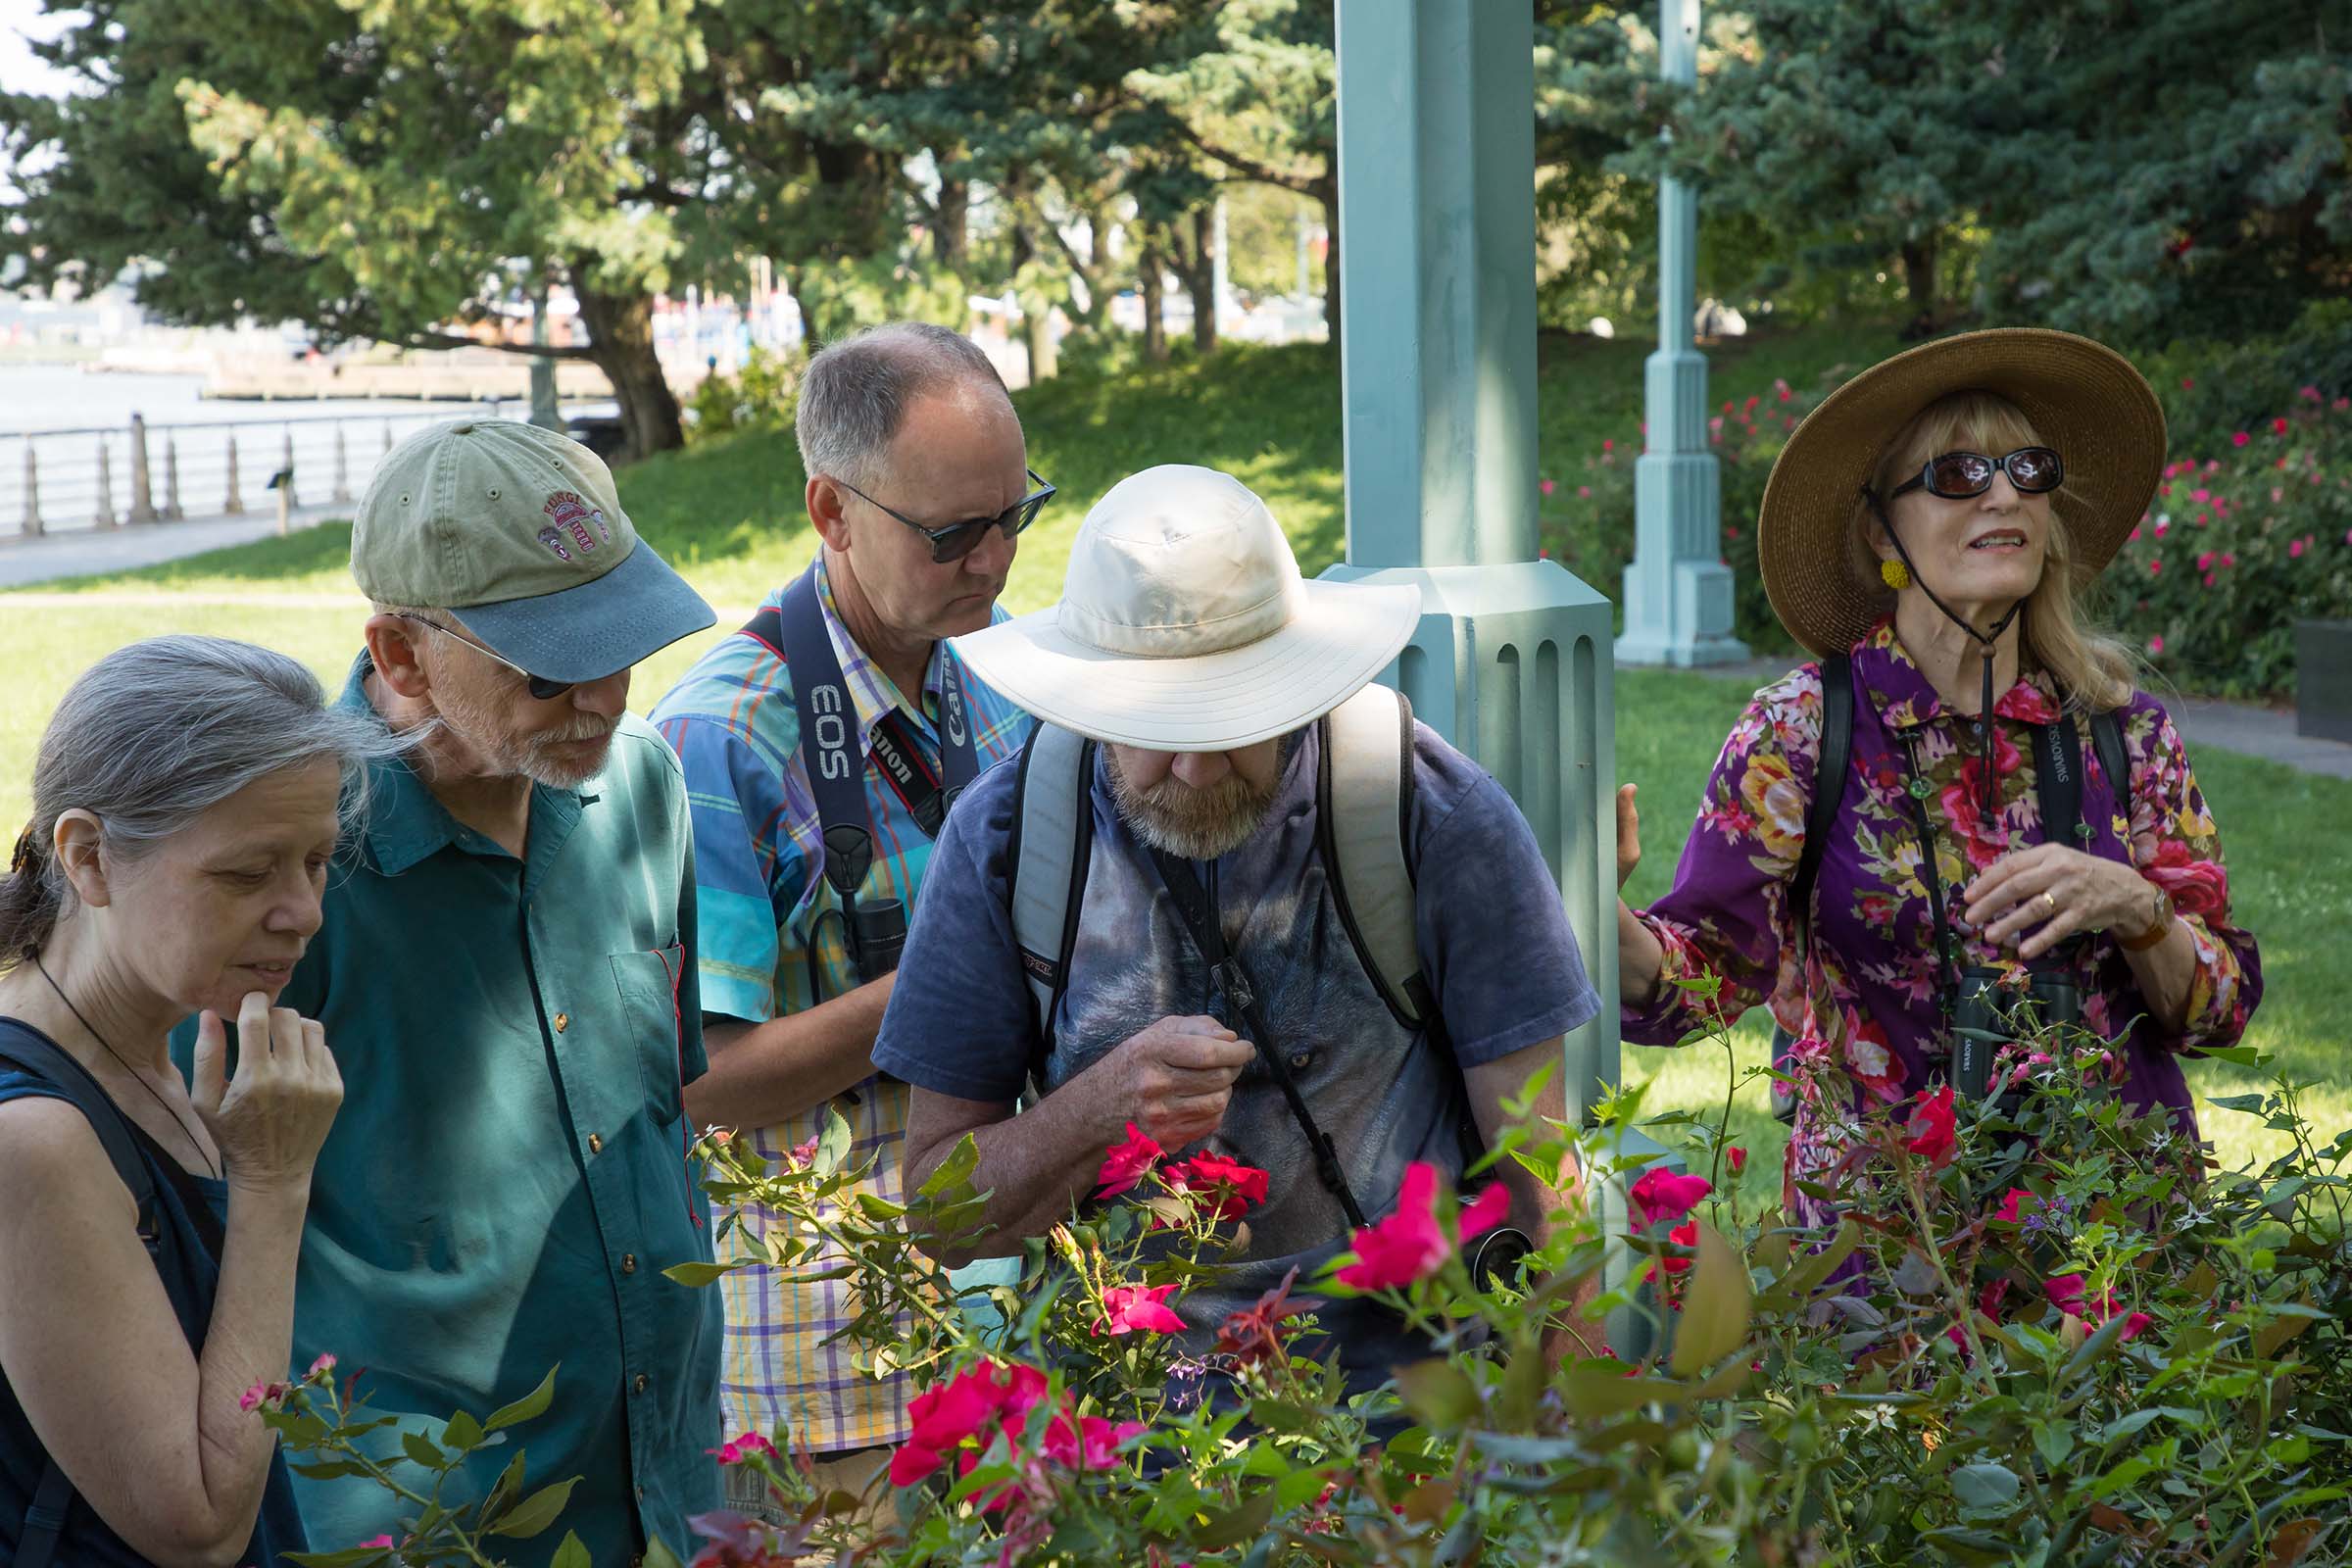 A group walk through the gardens and see nature in the Park